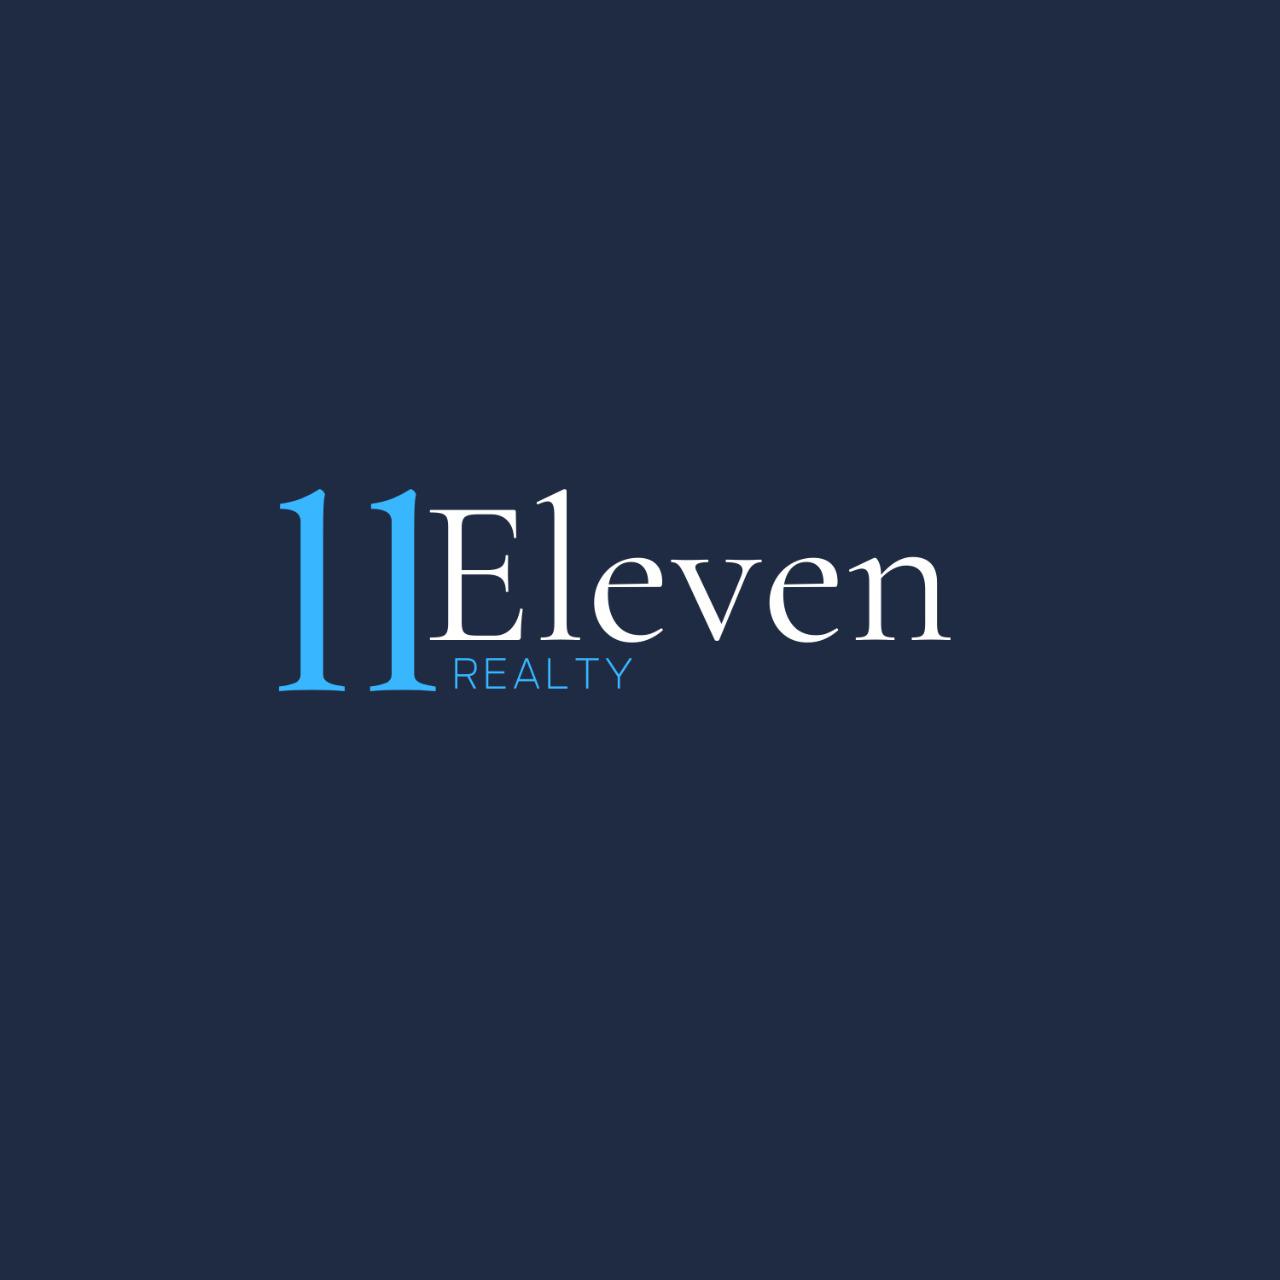 Eleven Realty